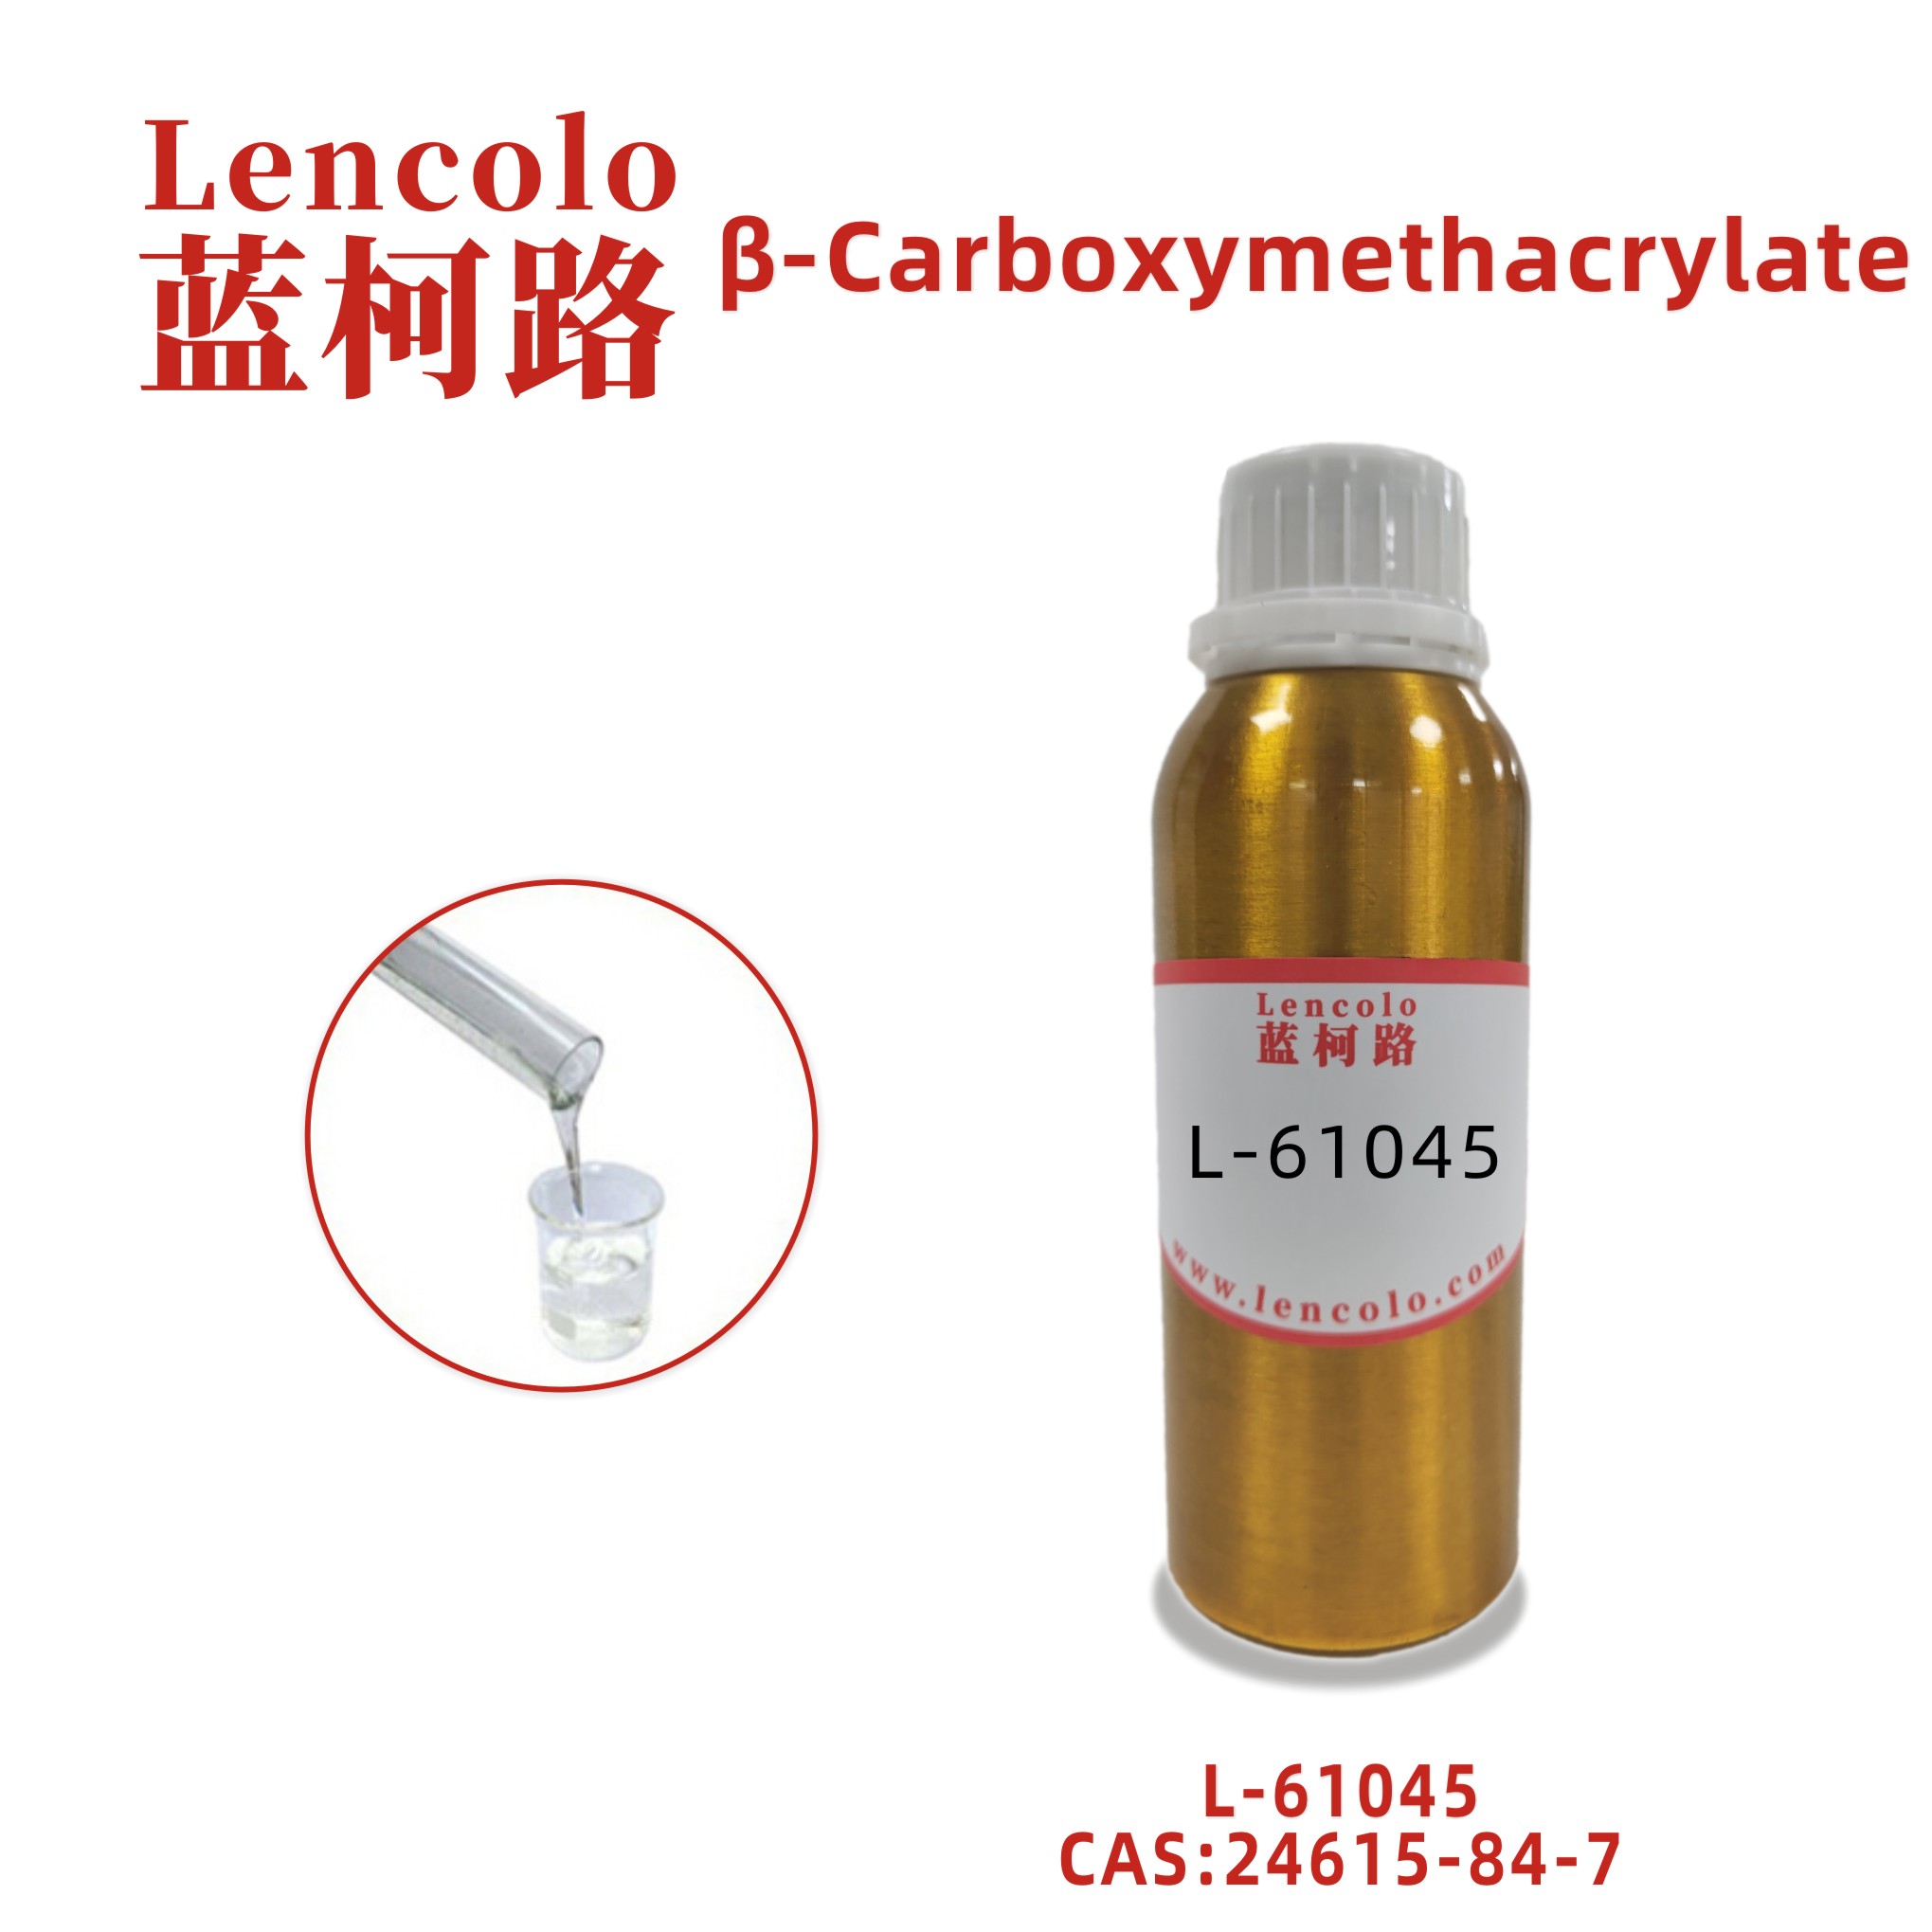 L-61045 (β-CEA) β-Carboxymethacrylate UV monomer for UV curing coatings